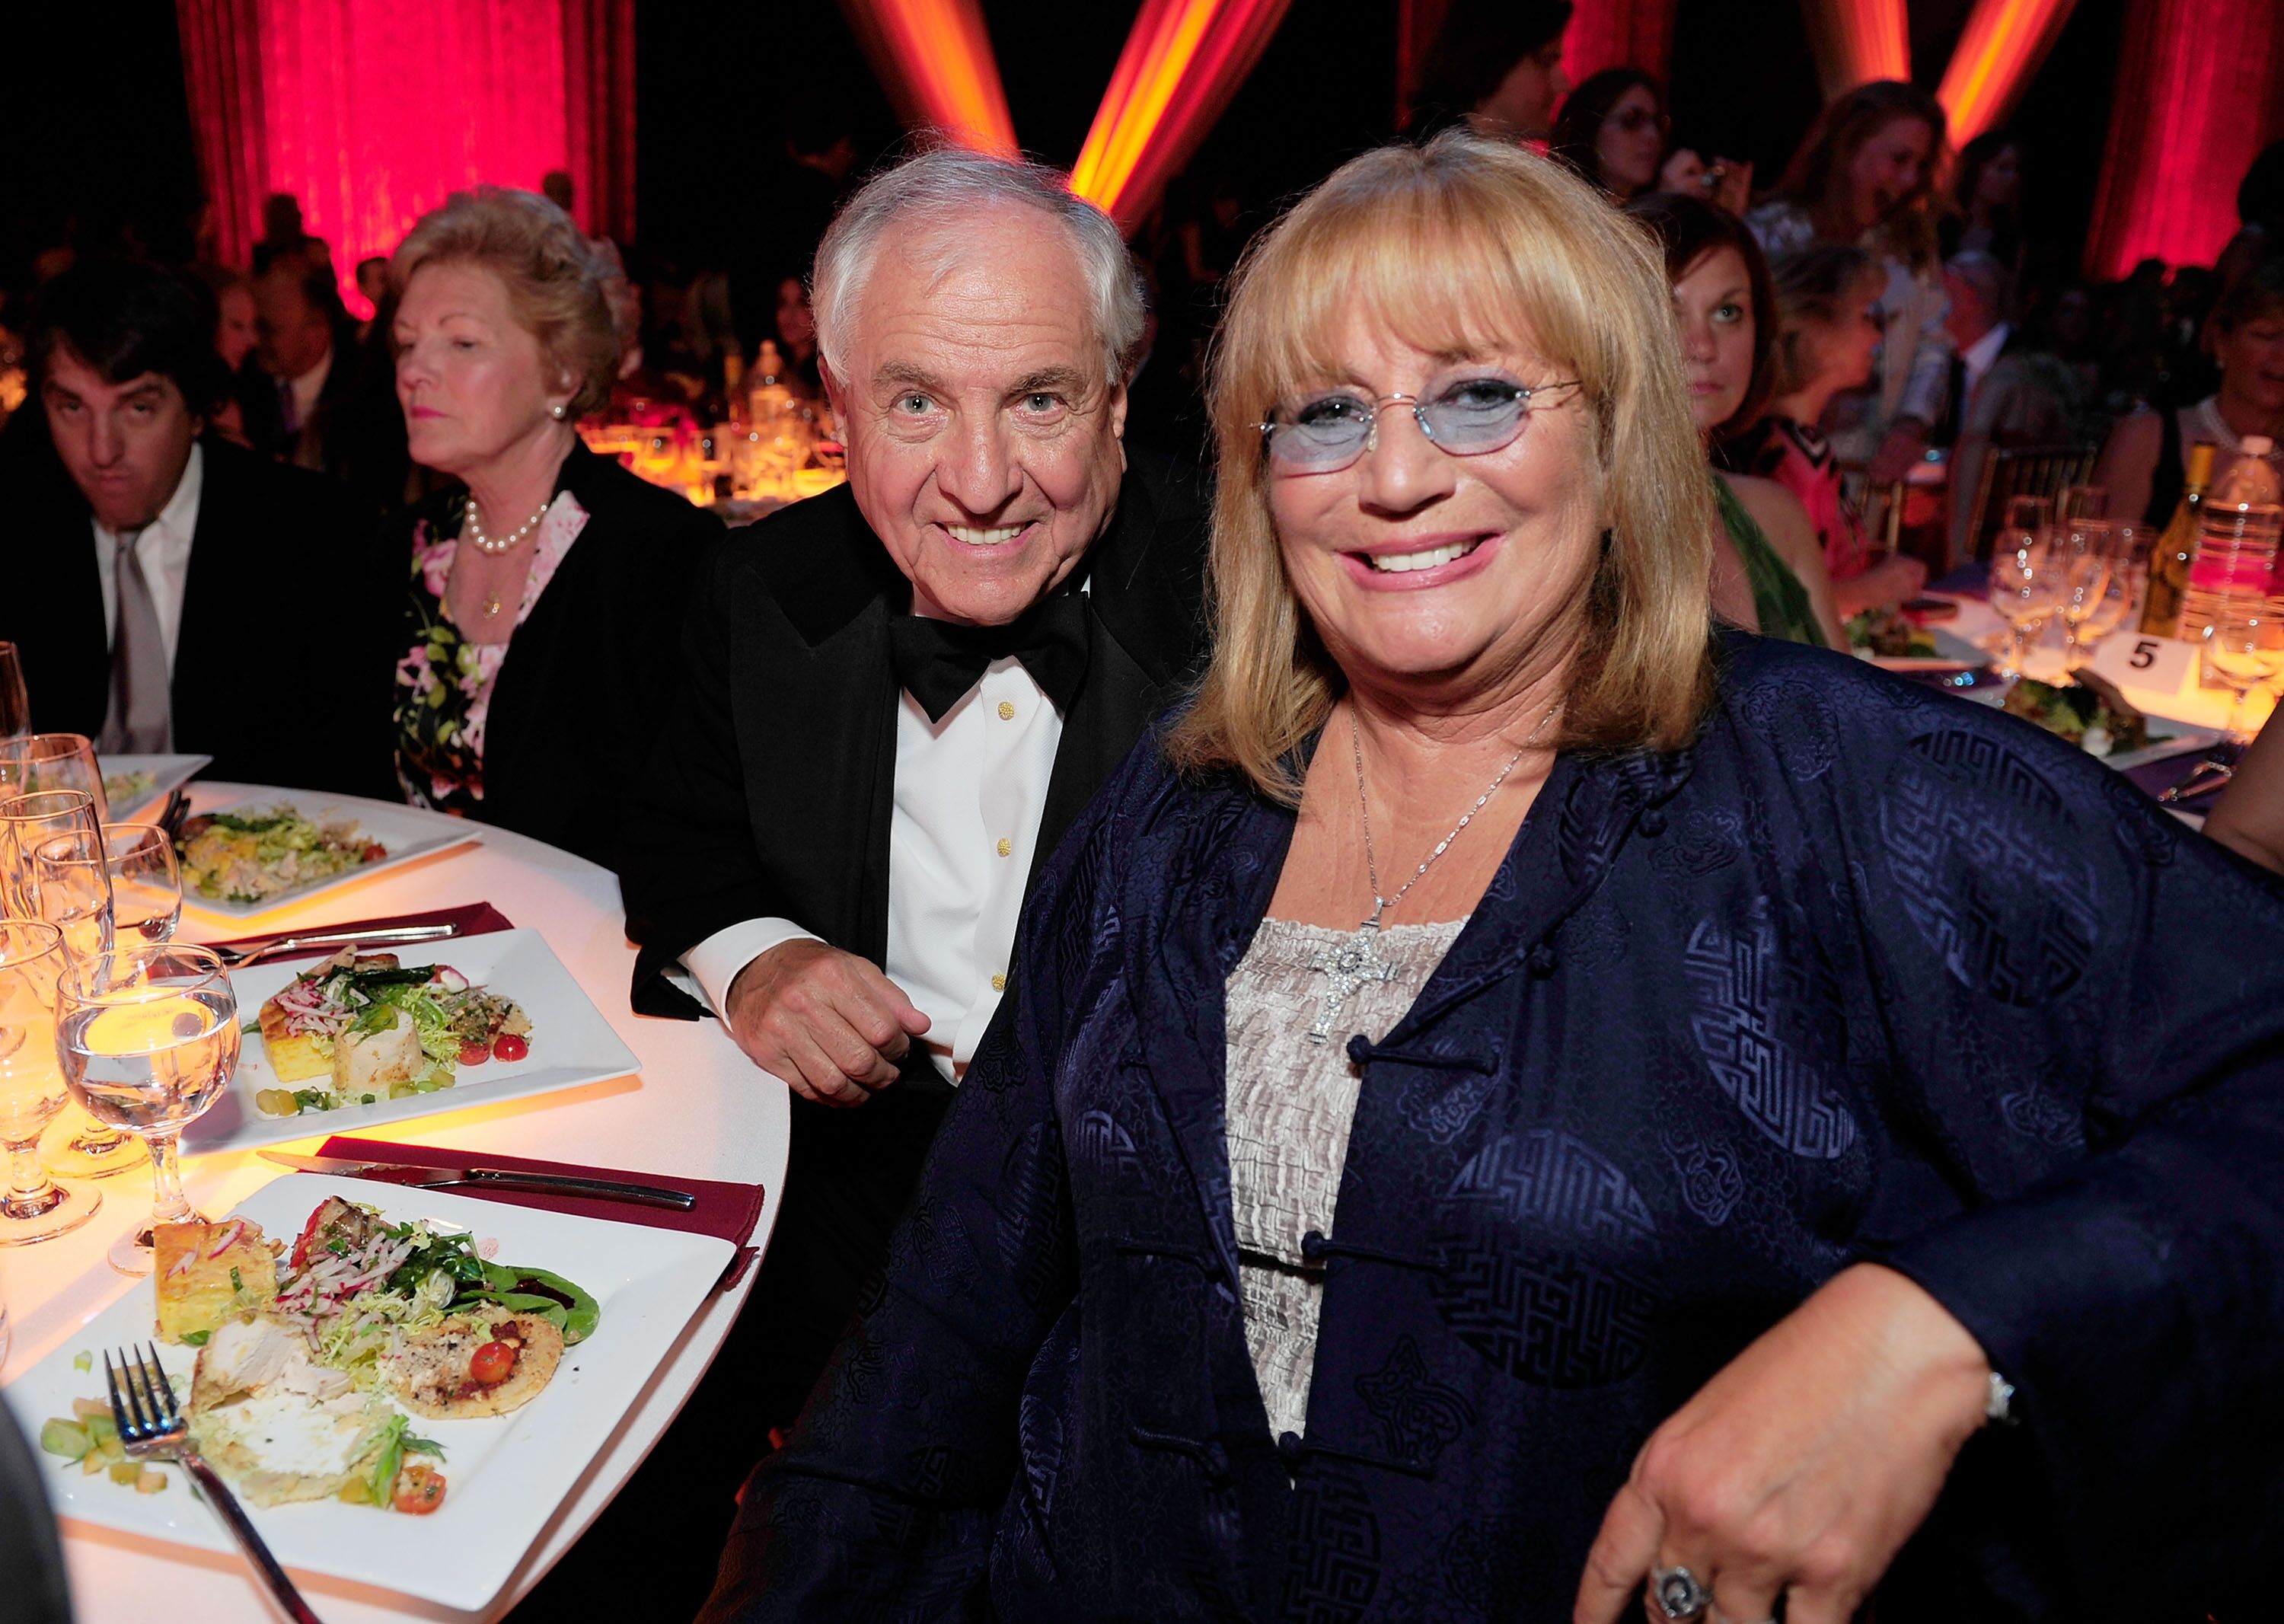 Garry Marshall and fellow director sister Penny Marshallat the 6th annual "TV Land Awards"in 2008 in Santa Monica, California | Source: Getty Images